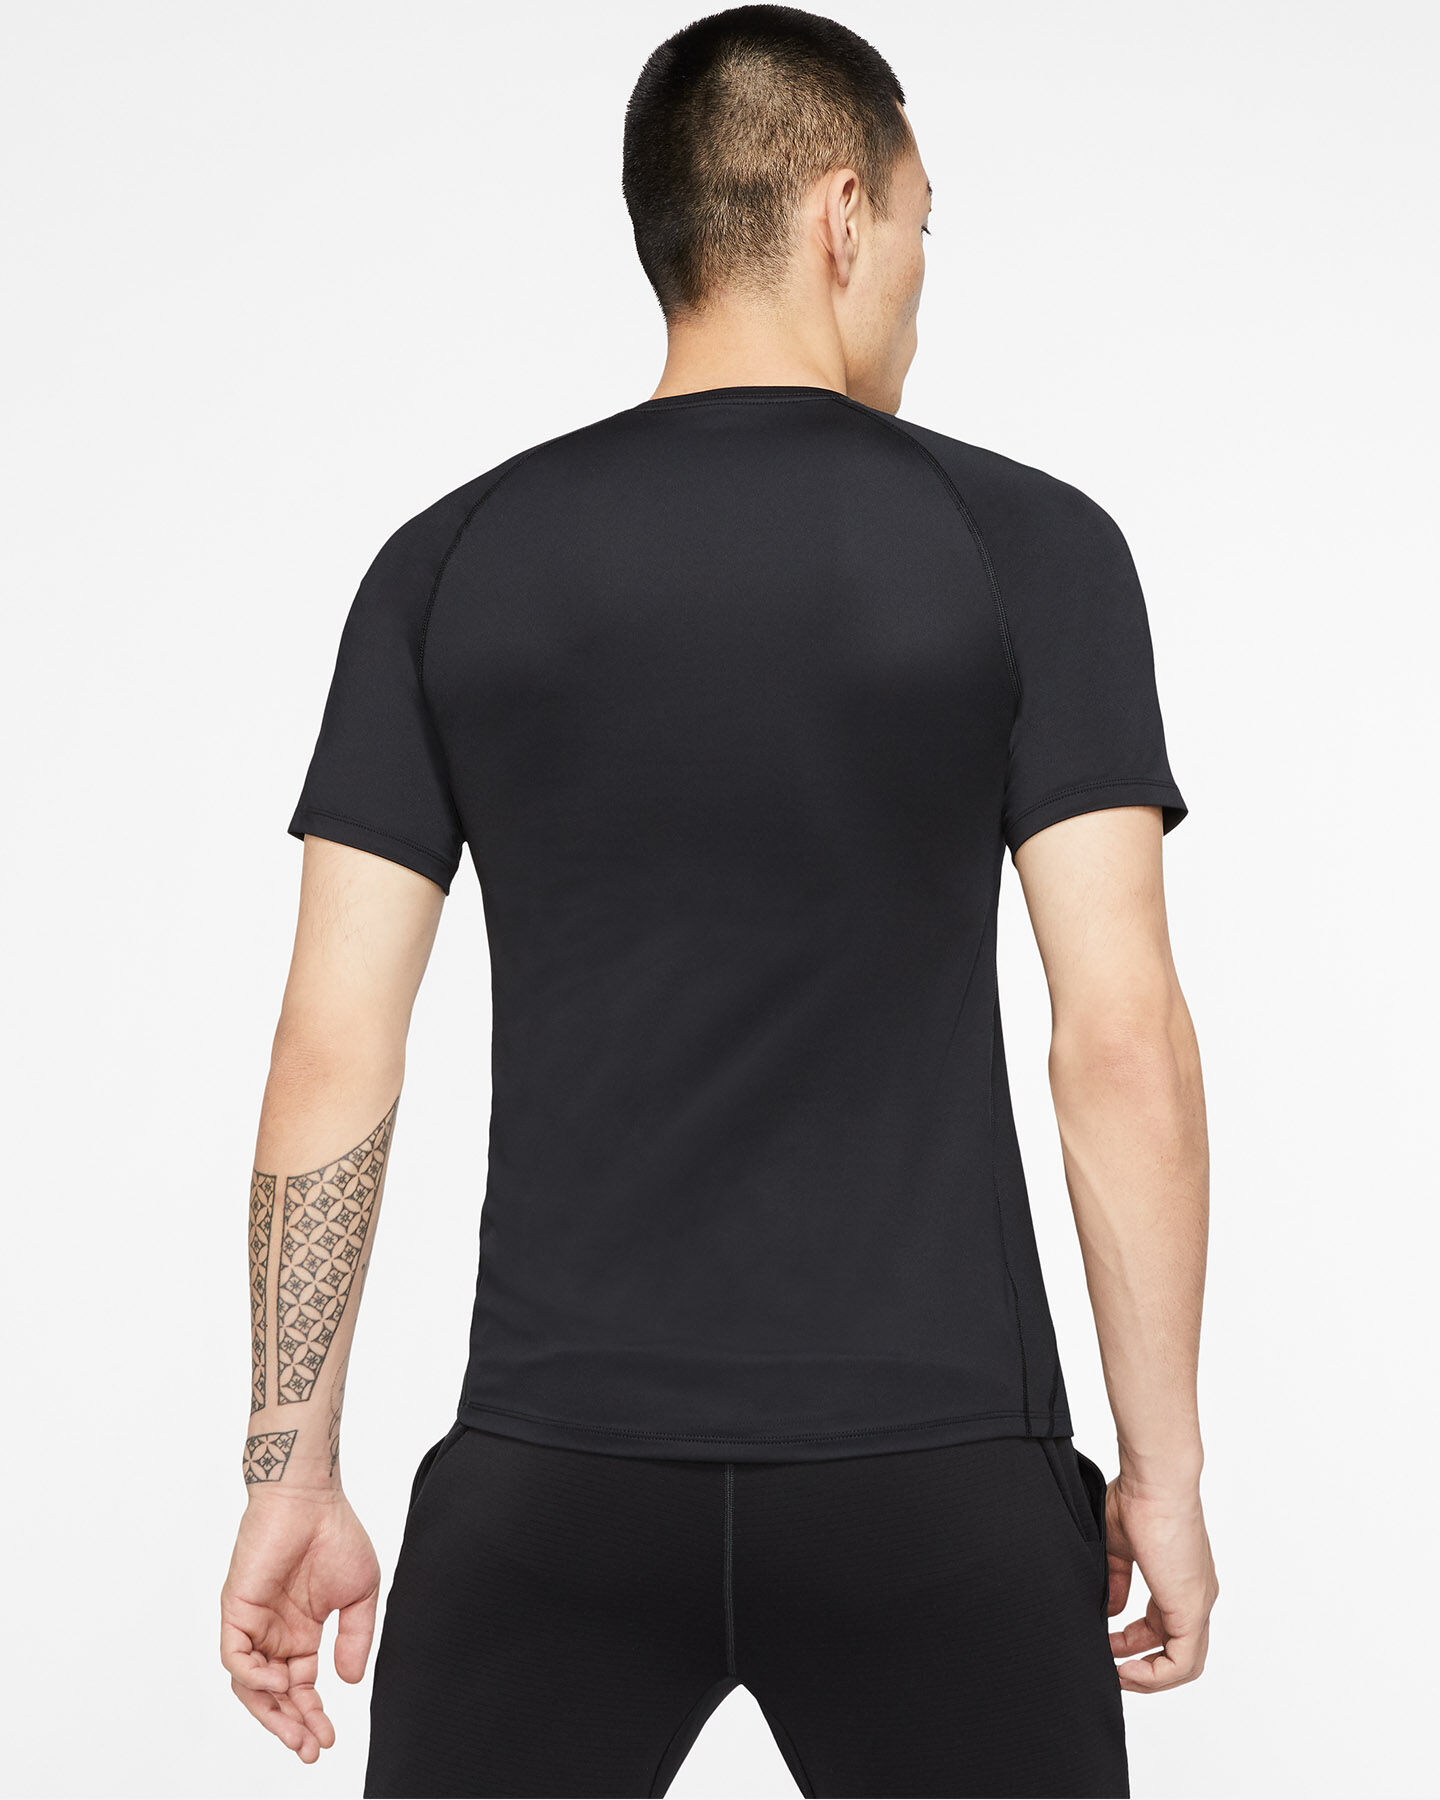  T-Shirt training NIKE PRO HBR M S5165134|010|S scatto 3